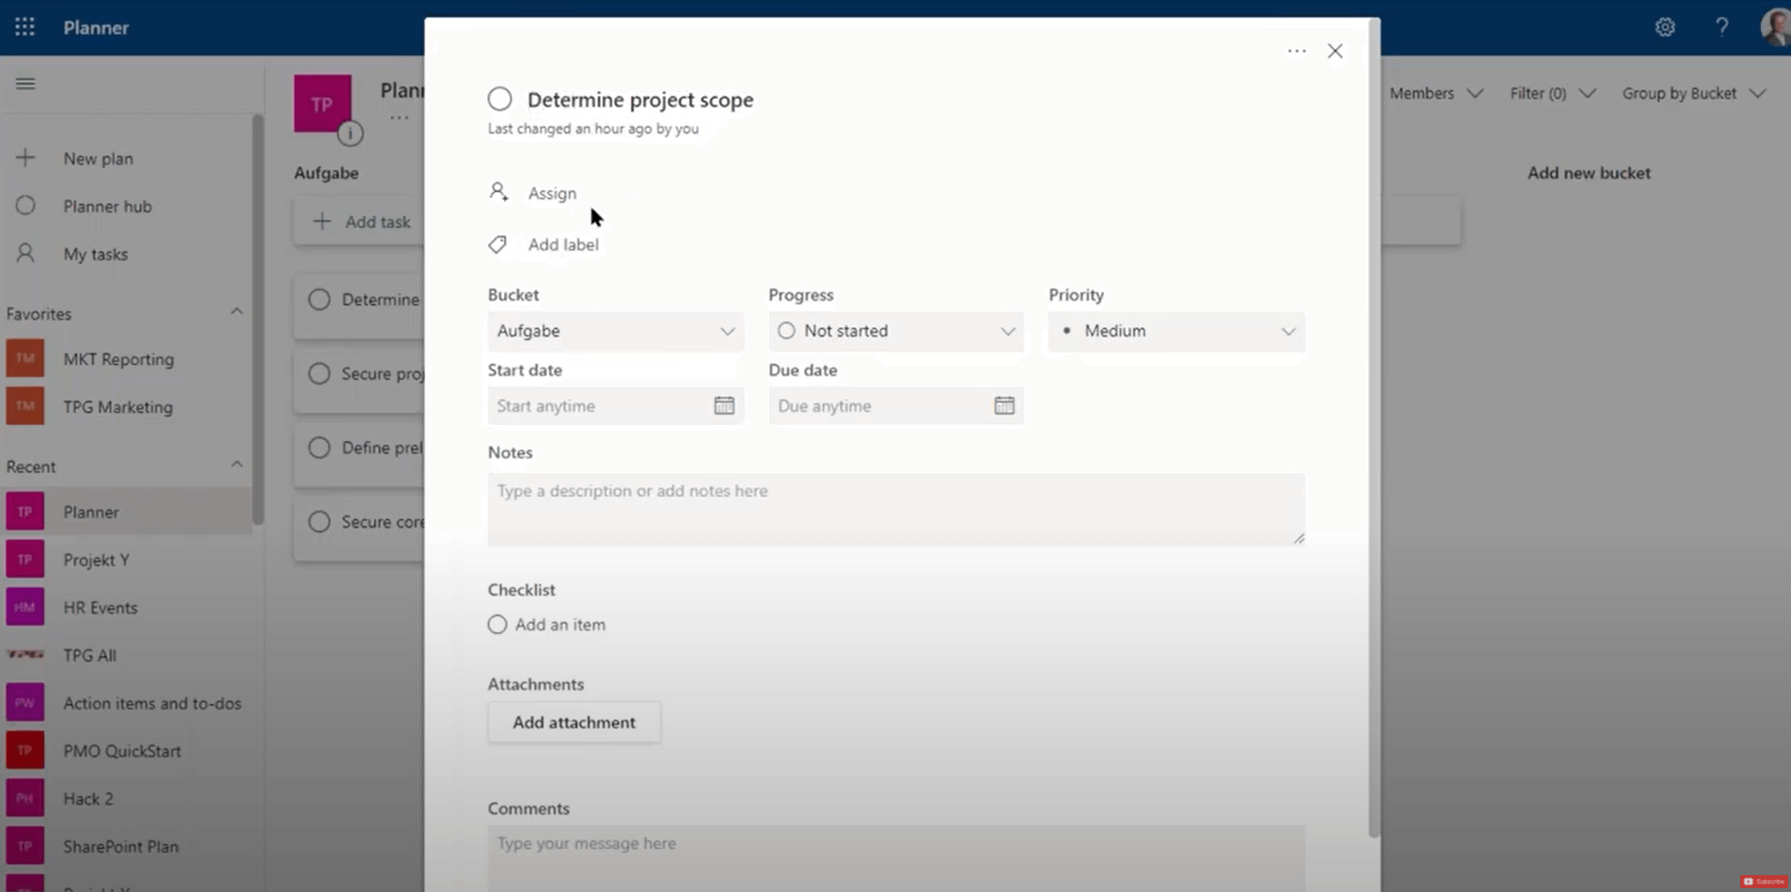 Integrating MS Project with Planner – Assigning attributes to a task in MS Planner